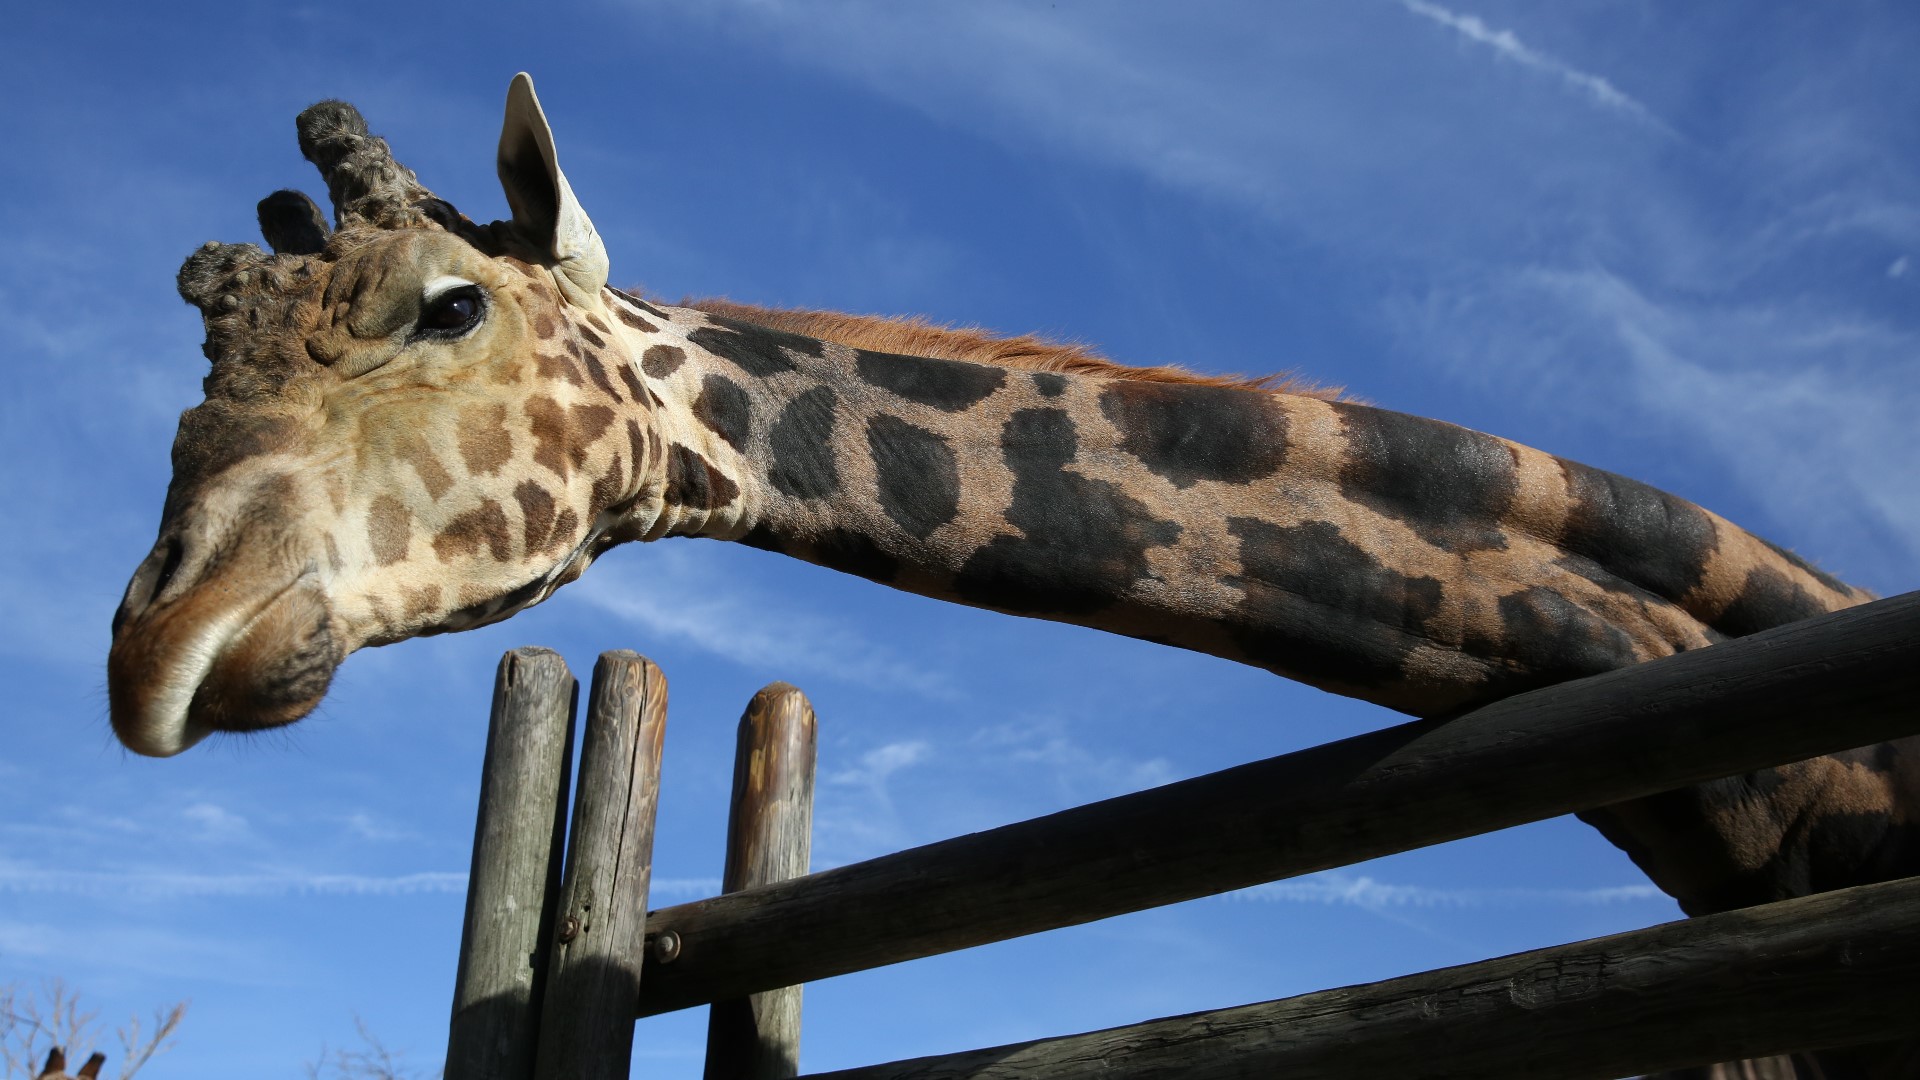 At 19 years old, Jumbe is one of the oldest giraffes in the U.S., according to a release from the zoo. Last year, he began exhibiting signs of pain with movement.